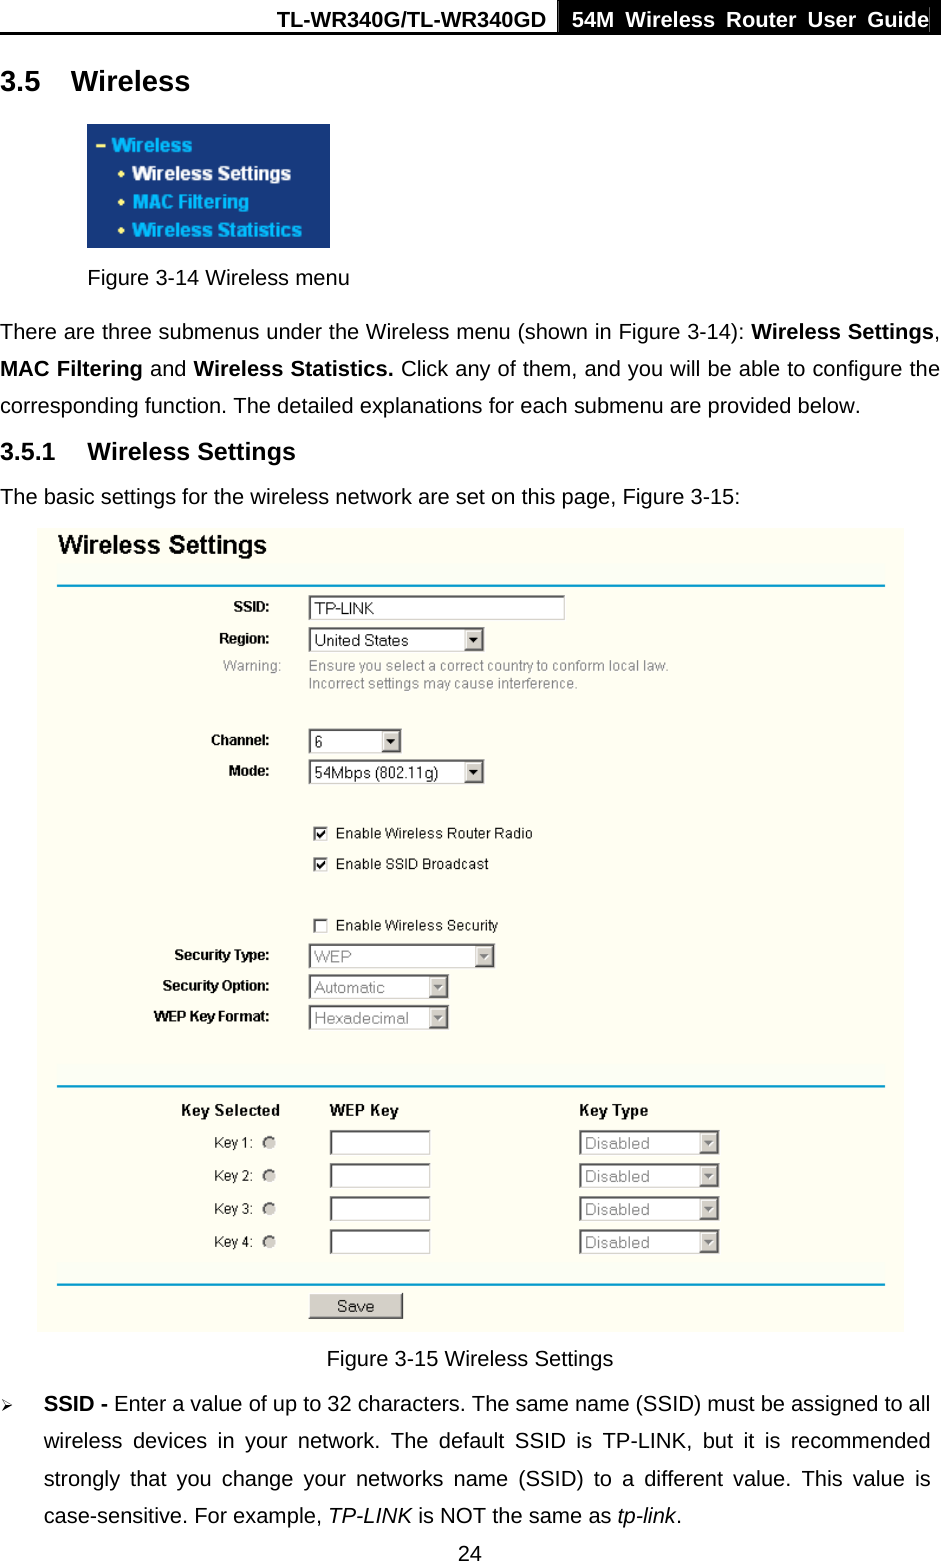 TL-WR340G/TL-WR340GD 54M Wireless Router User Guide  243.5 Wireless  Figure 3-14 Wireless menu There are three submenus under the Wireless menu (shown in Figure 3-14): Wireless Settings, MAC Filtering and Wireless Statistics. Click any of them, and you will be able to configure the corresponding function. The detailed explanations for each submenu are provided below. 3.5.1 Wireless Settings The basic settings for the wireless network are set on this page, Figure 3-15:  Figure 3-15 Wireless Settings ¾ SSID - Enter a value of up to 32 characters. The same name (SSID) must be assigned to all wireless devices in your network. The default SSID is TP-LINK, but it is recommended strongly that you change your networks name (SSID) to a different value. This value is case-sensitive. For example, TP-LINK is NOT the same as tp-link. 